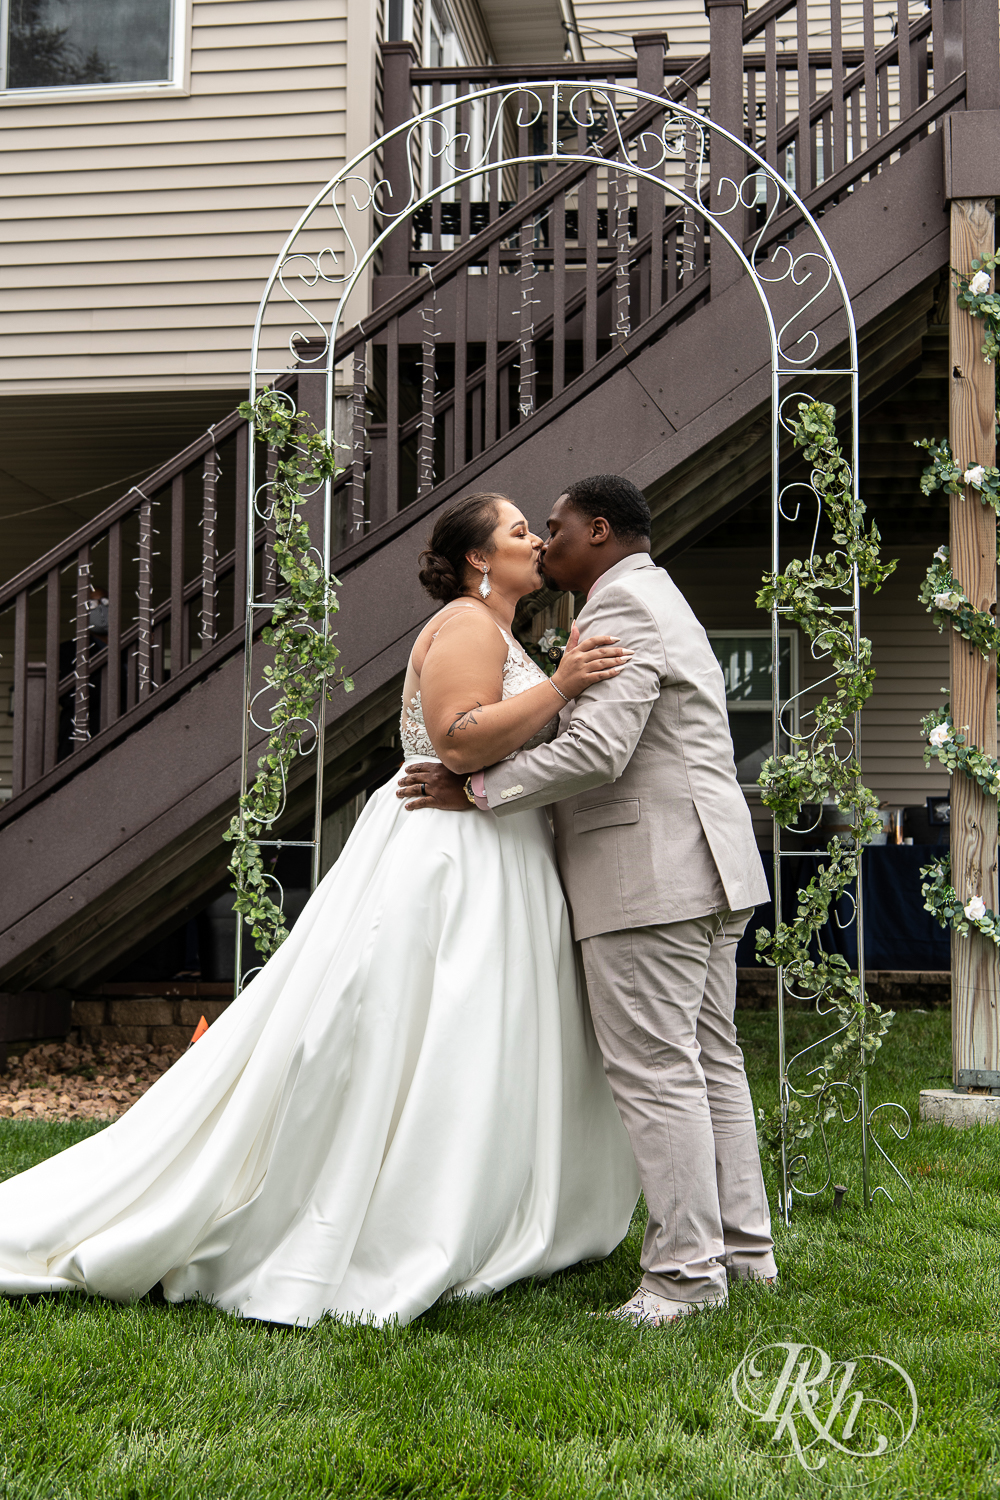 Black bride and groom kiss at wedding ceremony at home wedding in Brooklyn Park, Minnesota.